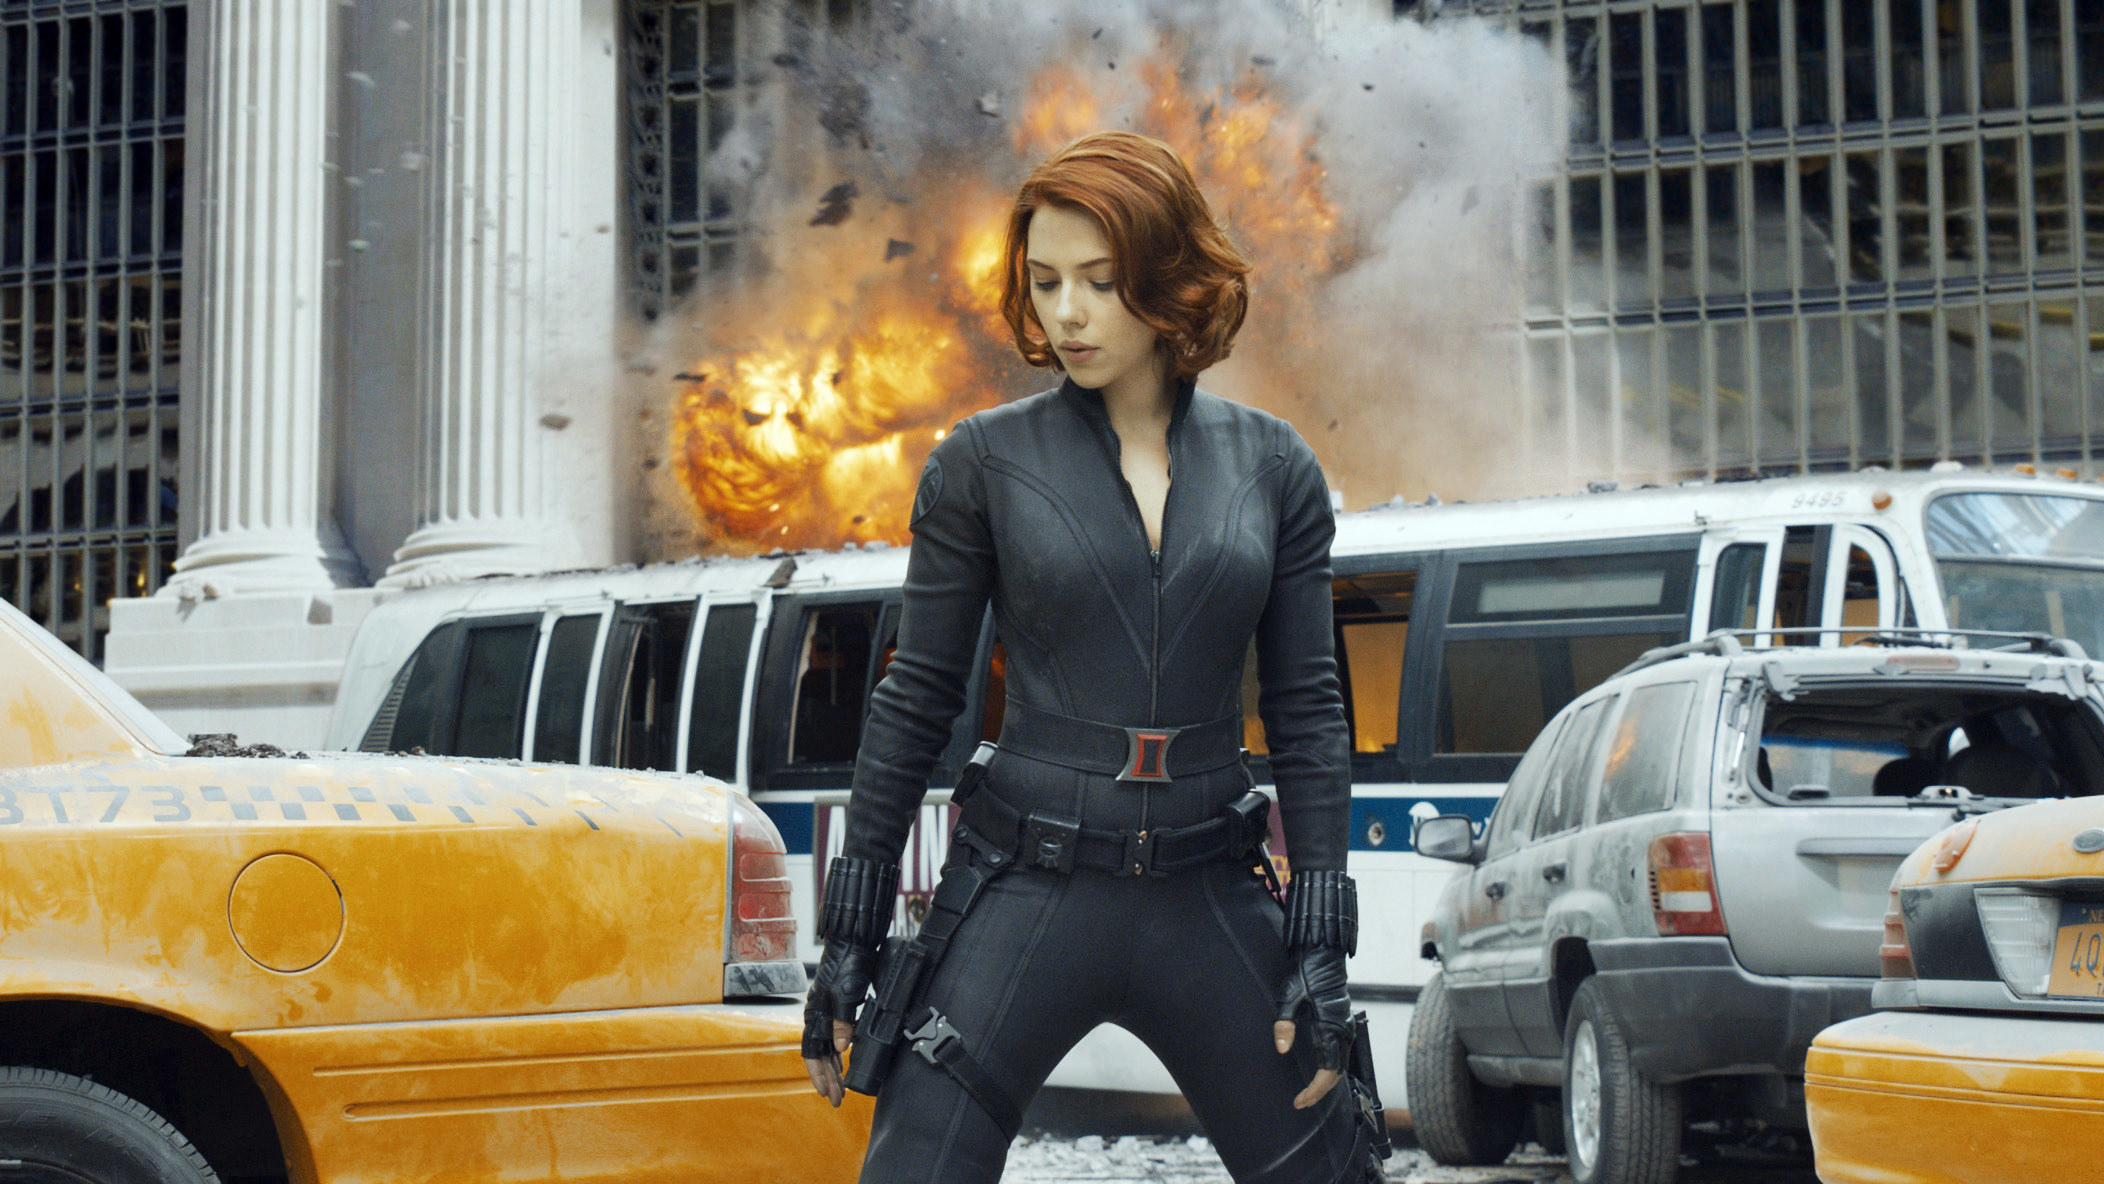 Scarlett Johansson as Black Widow posing in front of an explosion in the first Avengers movie